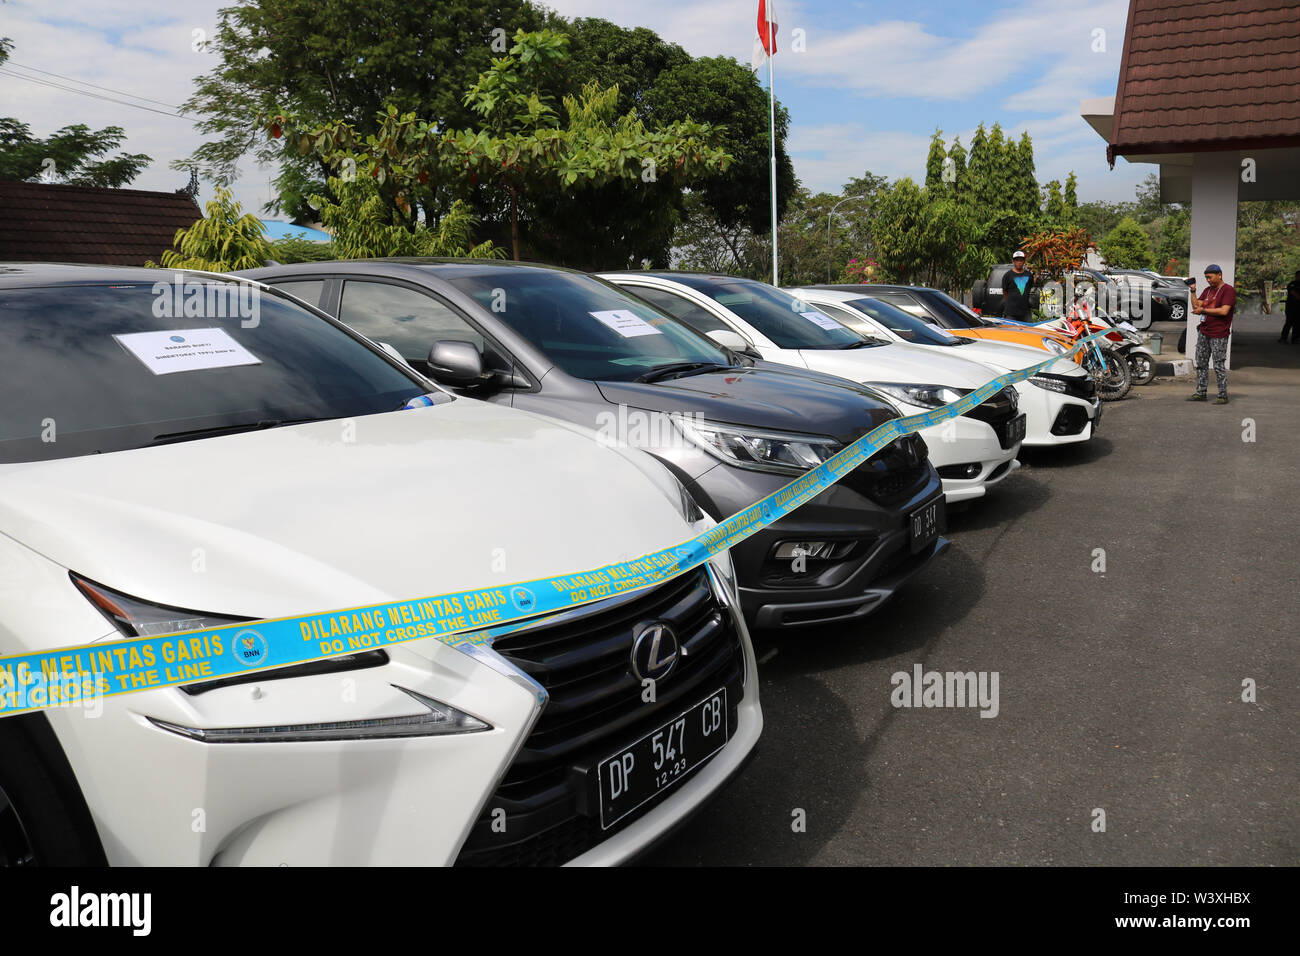 Makassar, Indonesia 18th July 2019, Evidence in the form of luxury cars resulting from the arrest of two farmers who became drug dealers and money laundering from Sidrap Regency was fitted with police lines by the National Narcotics Agency of the Republic of Indonesia. Credit: Herwin Bahar / Alamy Live News Stock Photo